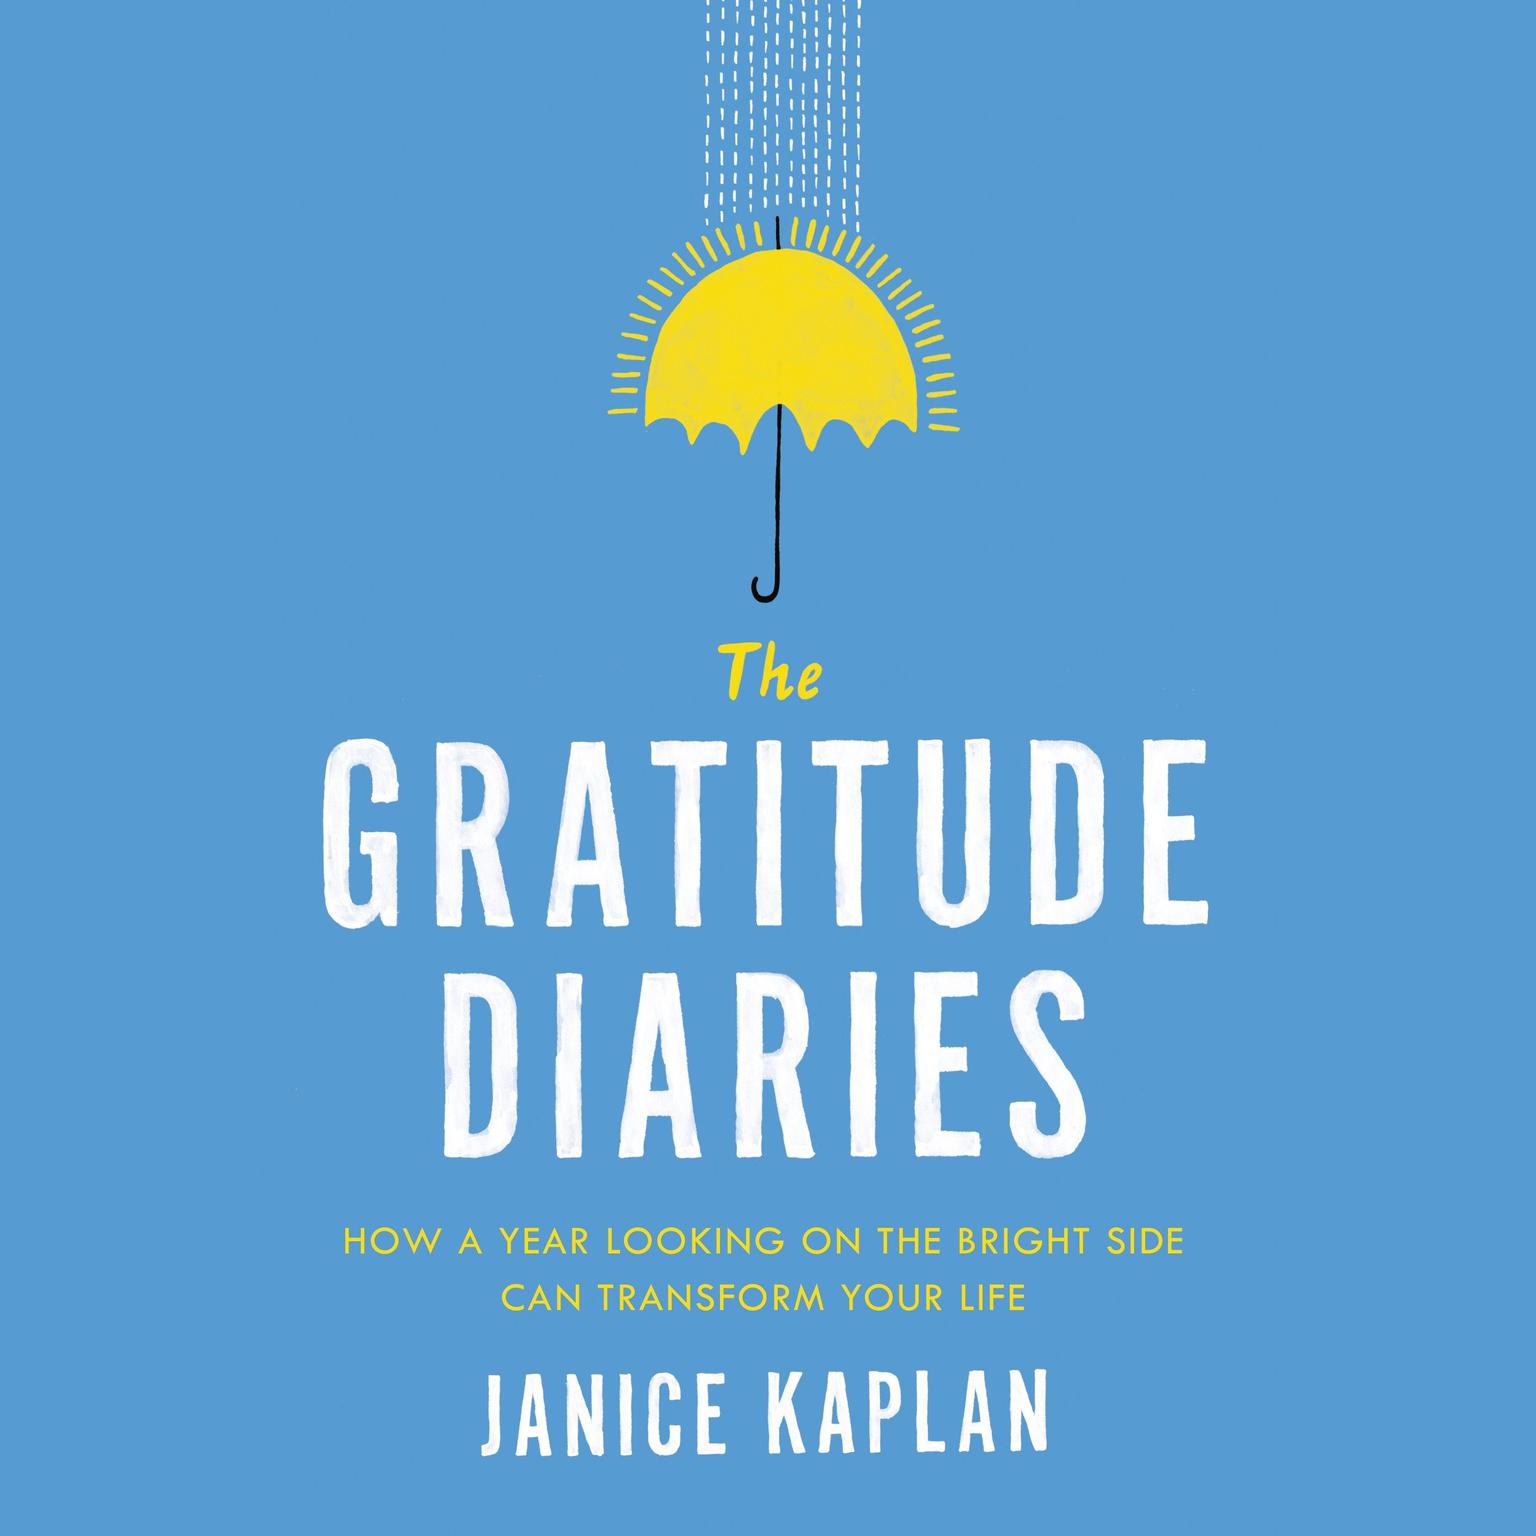 The Gratitude Diaries: How a Year Looking on the Bright Side Can Transform Your Life Audiobook, by Janice Kaplan